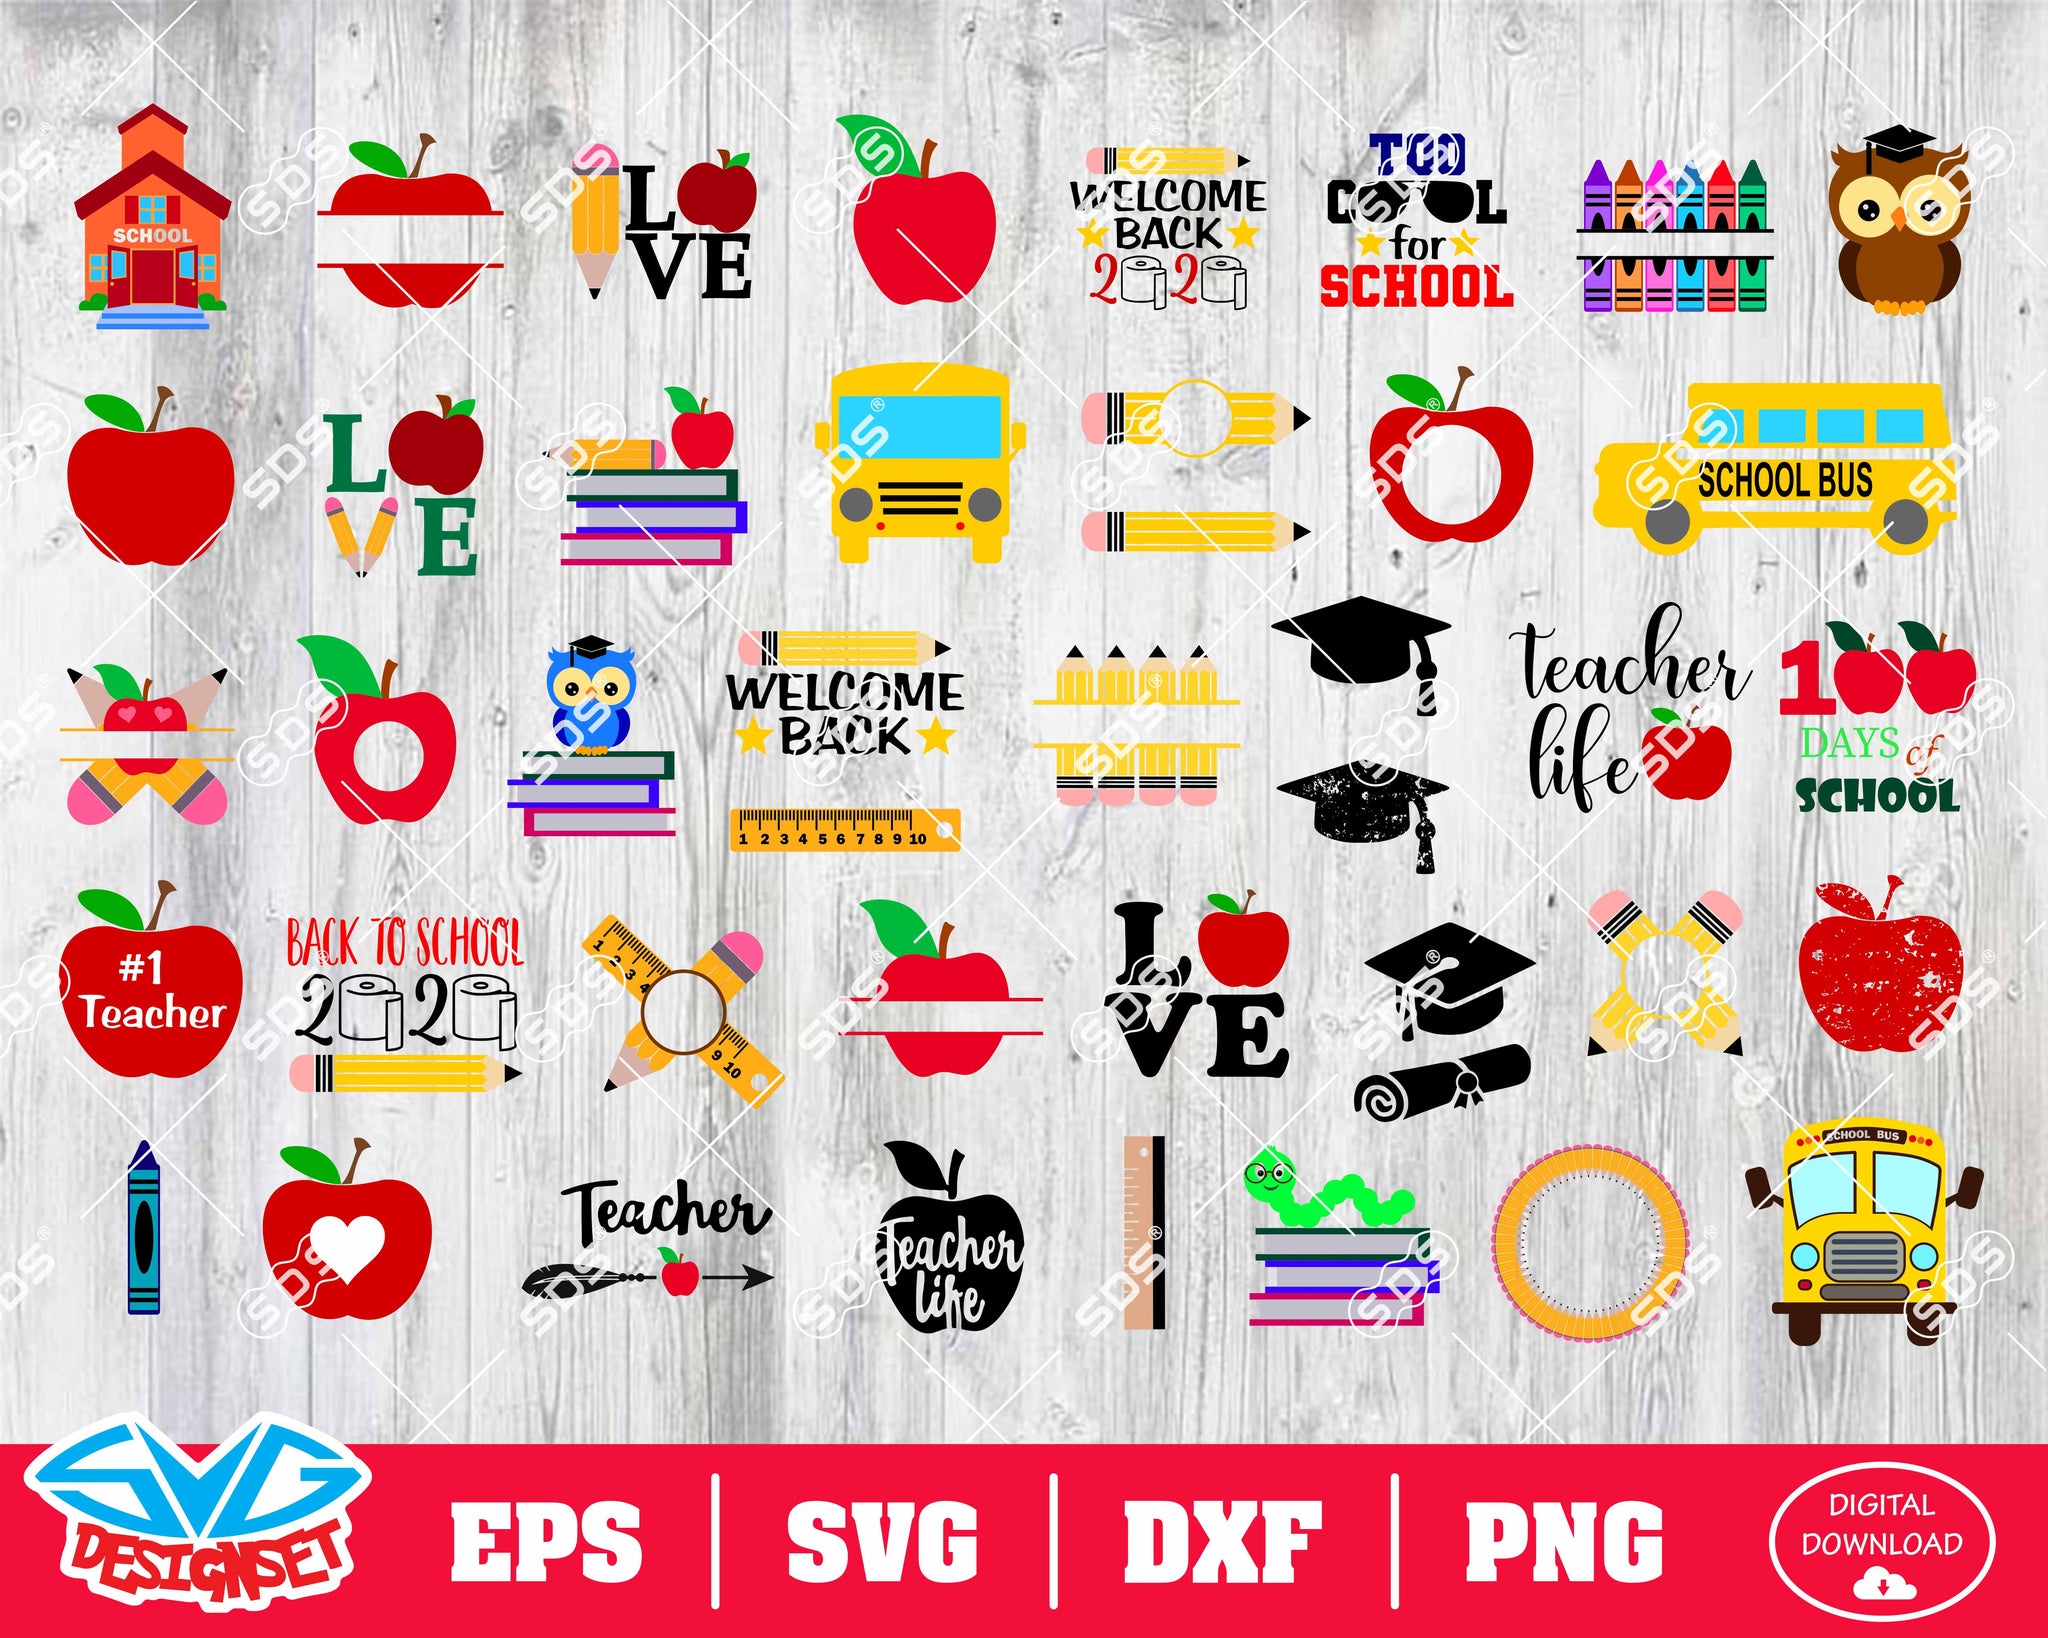 Back to School Svg, Dxf, Eps, Png, Clipart, Silhouette and Cutfiles #1 - SVGDesignSets